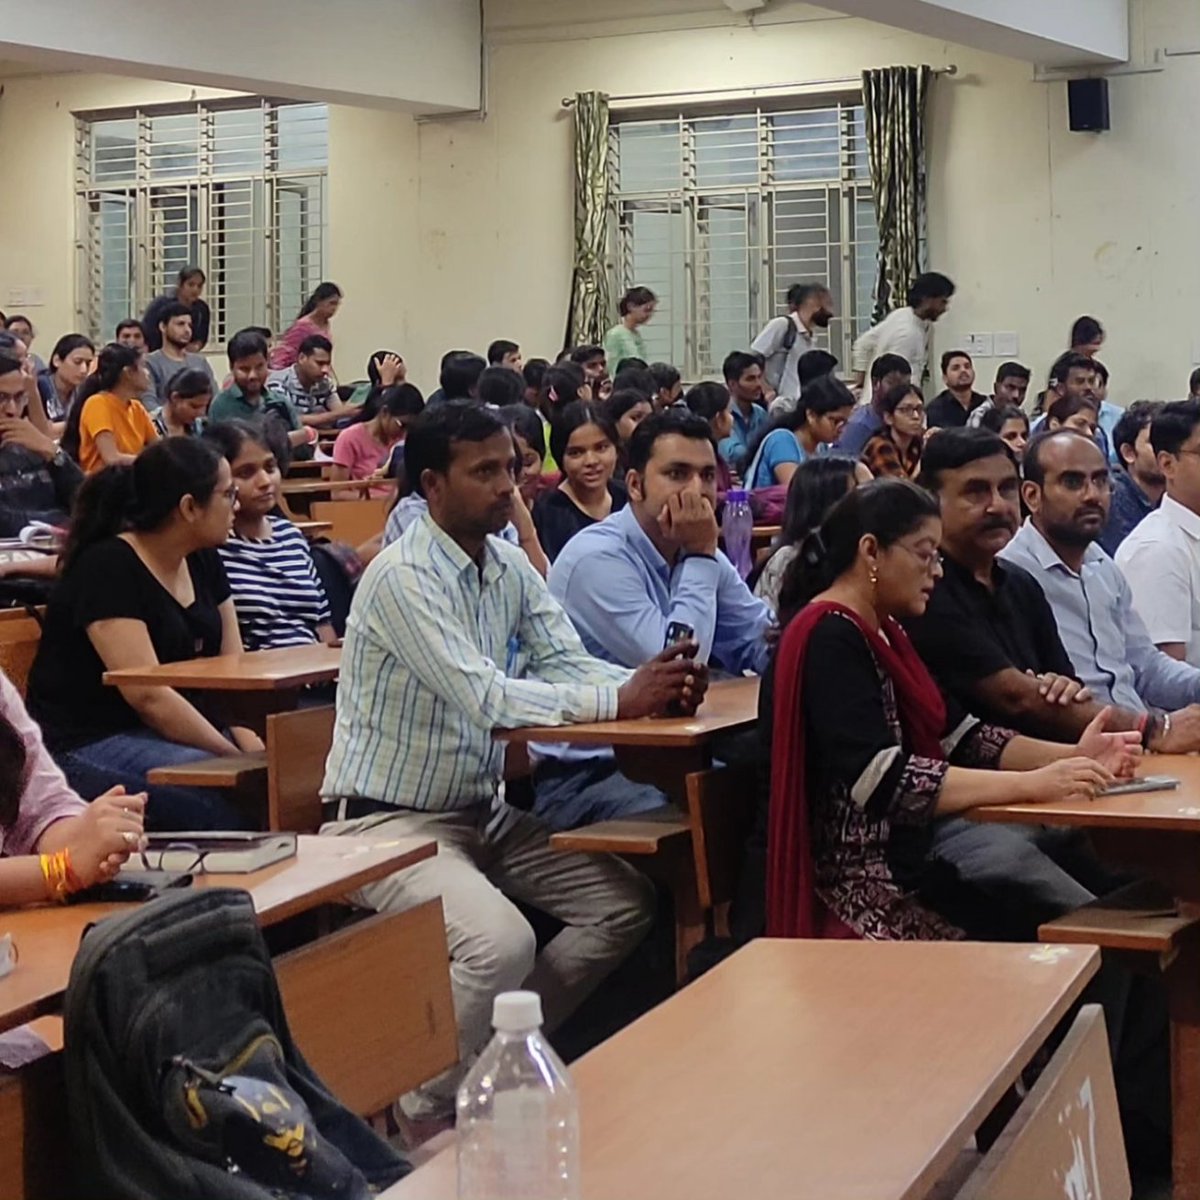 Engaging 2-day workshop organised at Institute of Science, Banaras Hindu University. Sensitised students to the significance of science communication & writing. Glad to come across bright students with interesting insights. @CSIR_NIScPR @VCofficeBHU @studentsIScBHU @bhupro